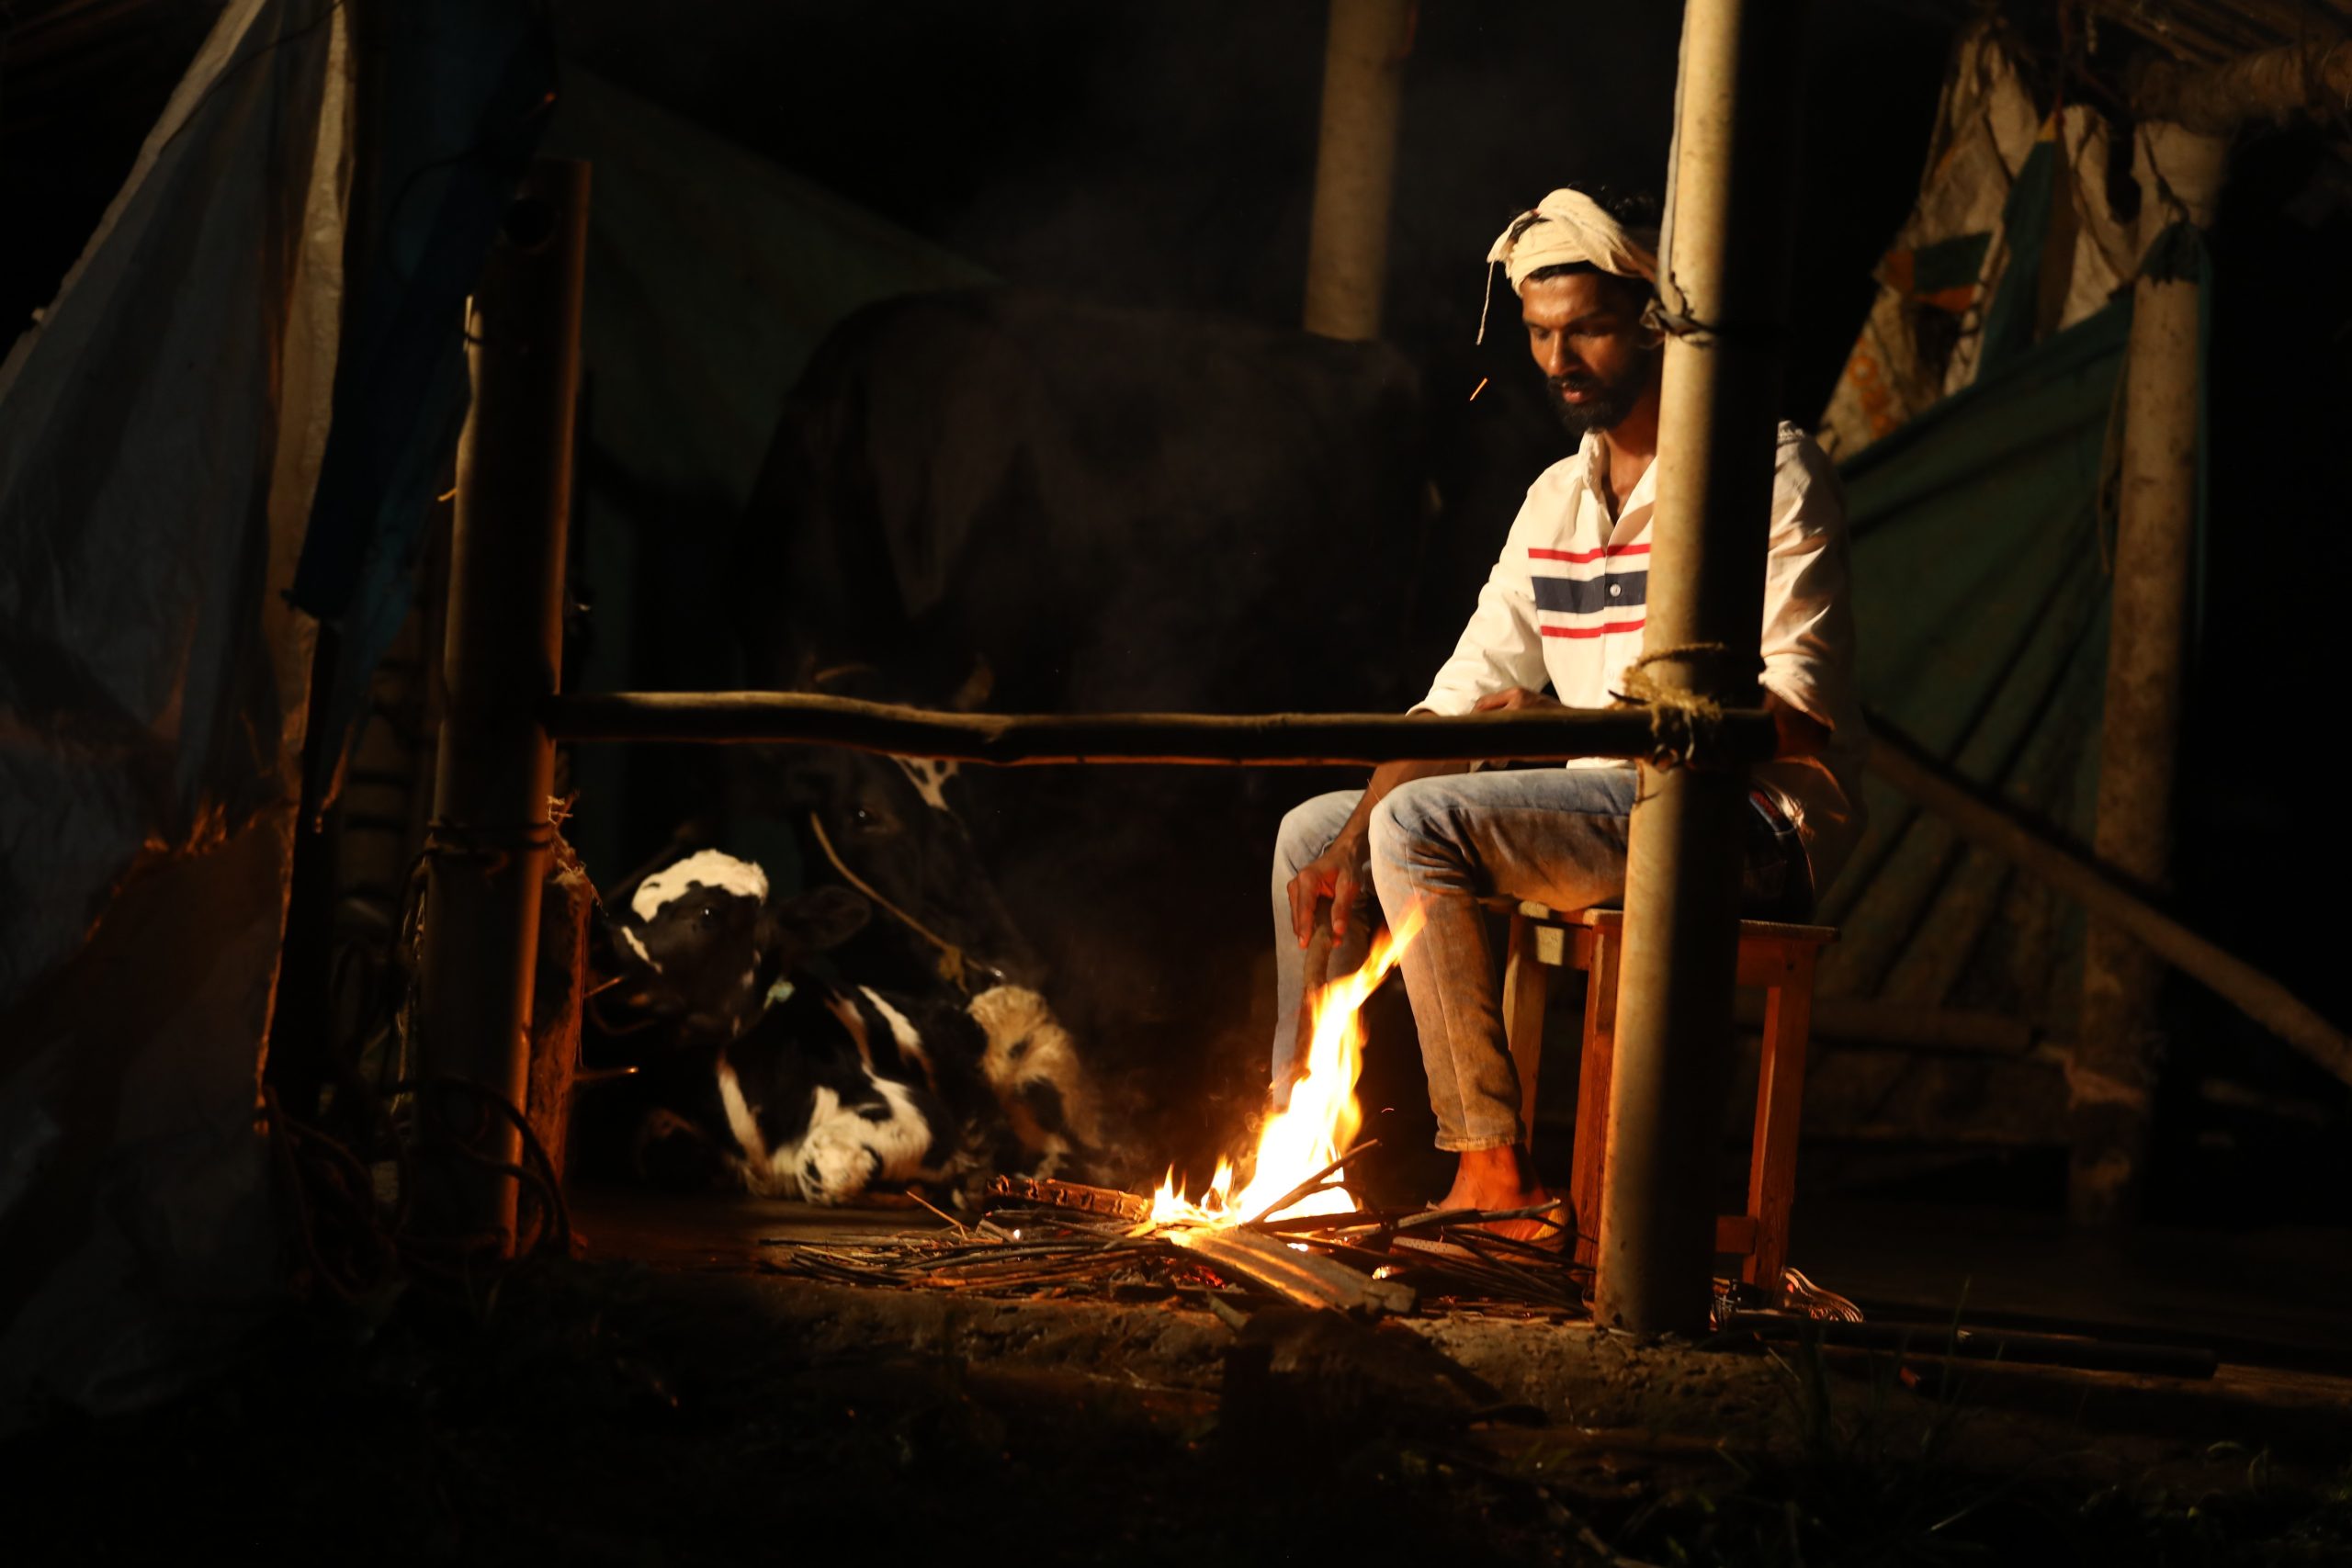 M Jose, a cattle farmer of Mundakkolli near Cheeral in Wayanad guards his cow at night against tiger attack. (Jithesh Cheeral)